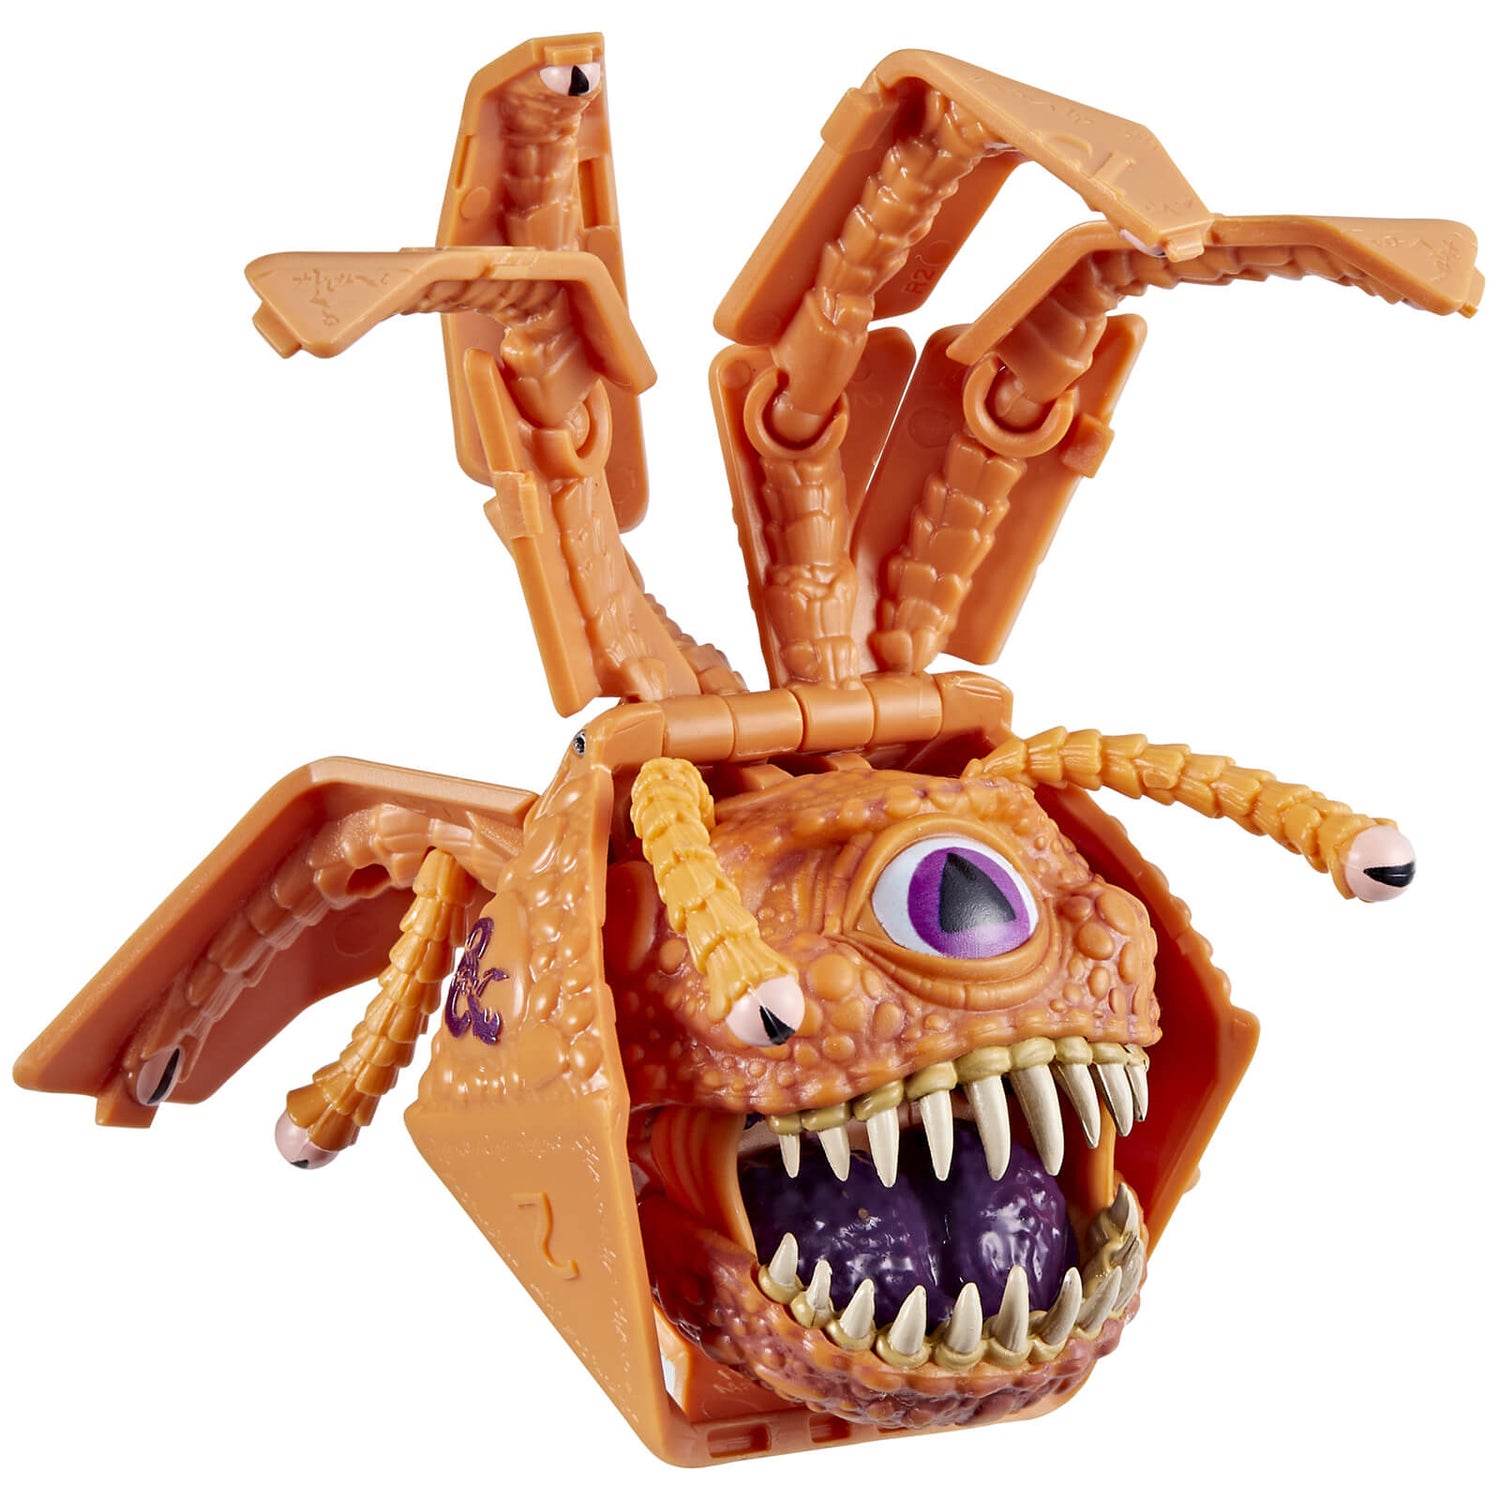 Hasbro Dungeons & Dragons Dicelings Beholder Collectible Action Figure